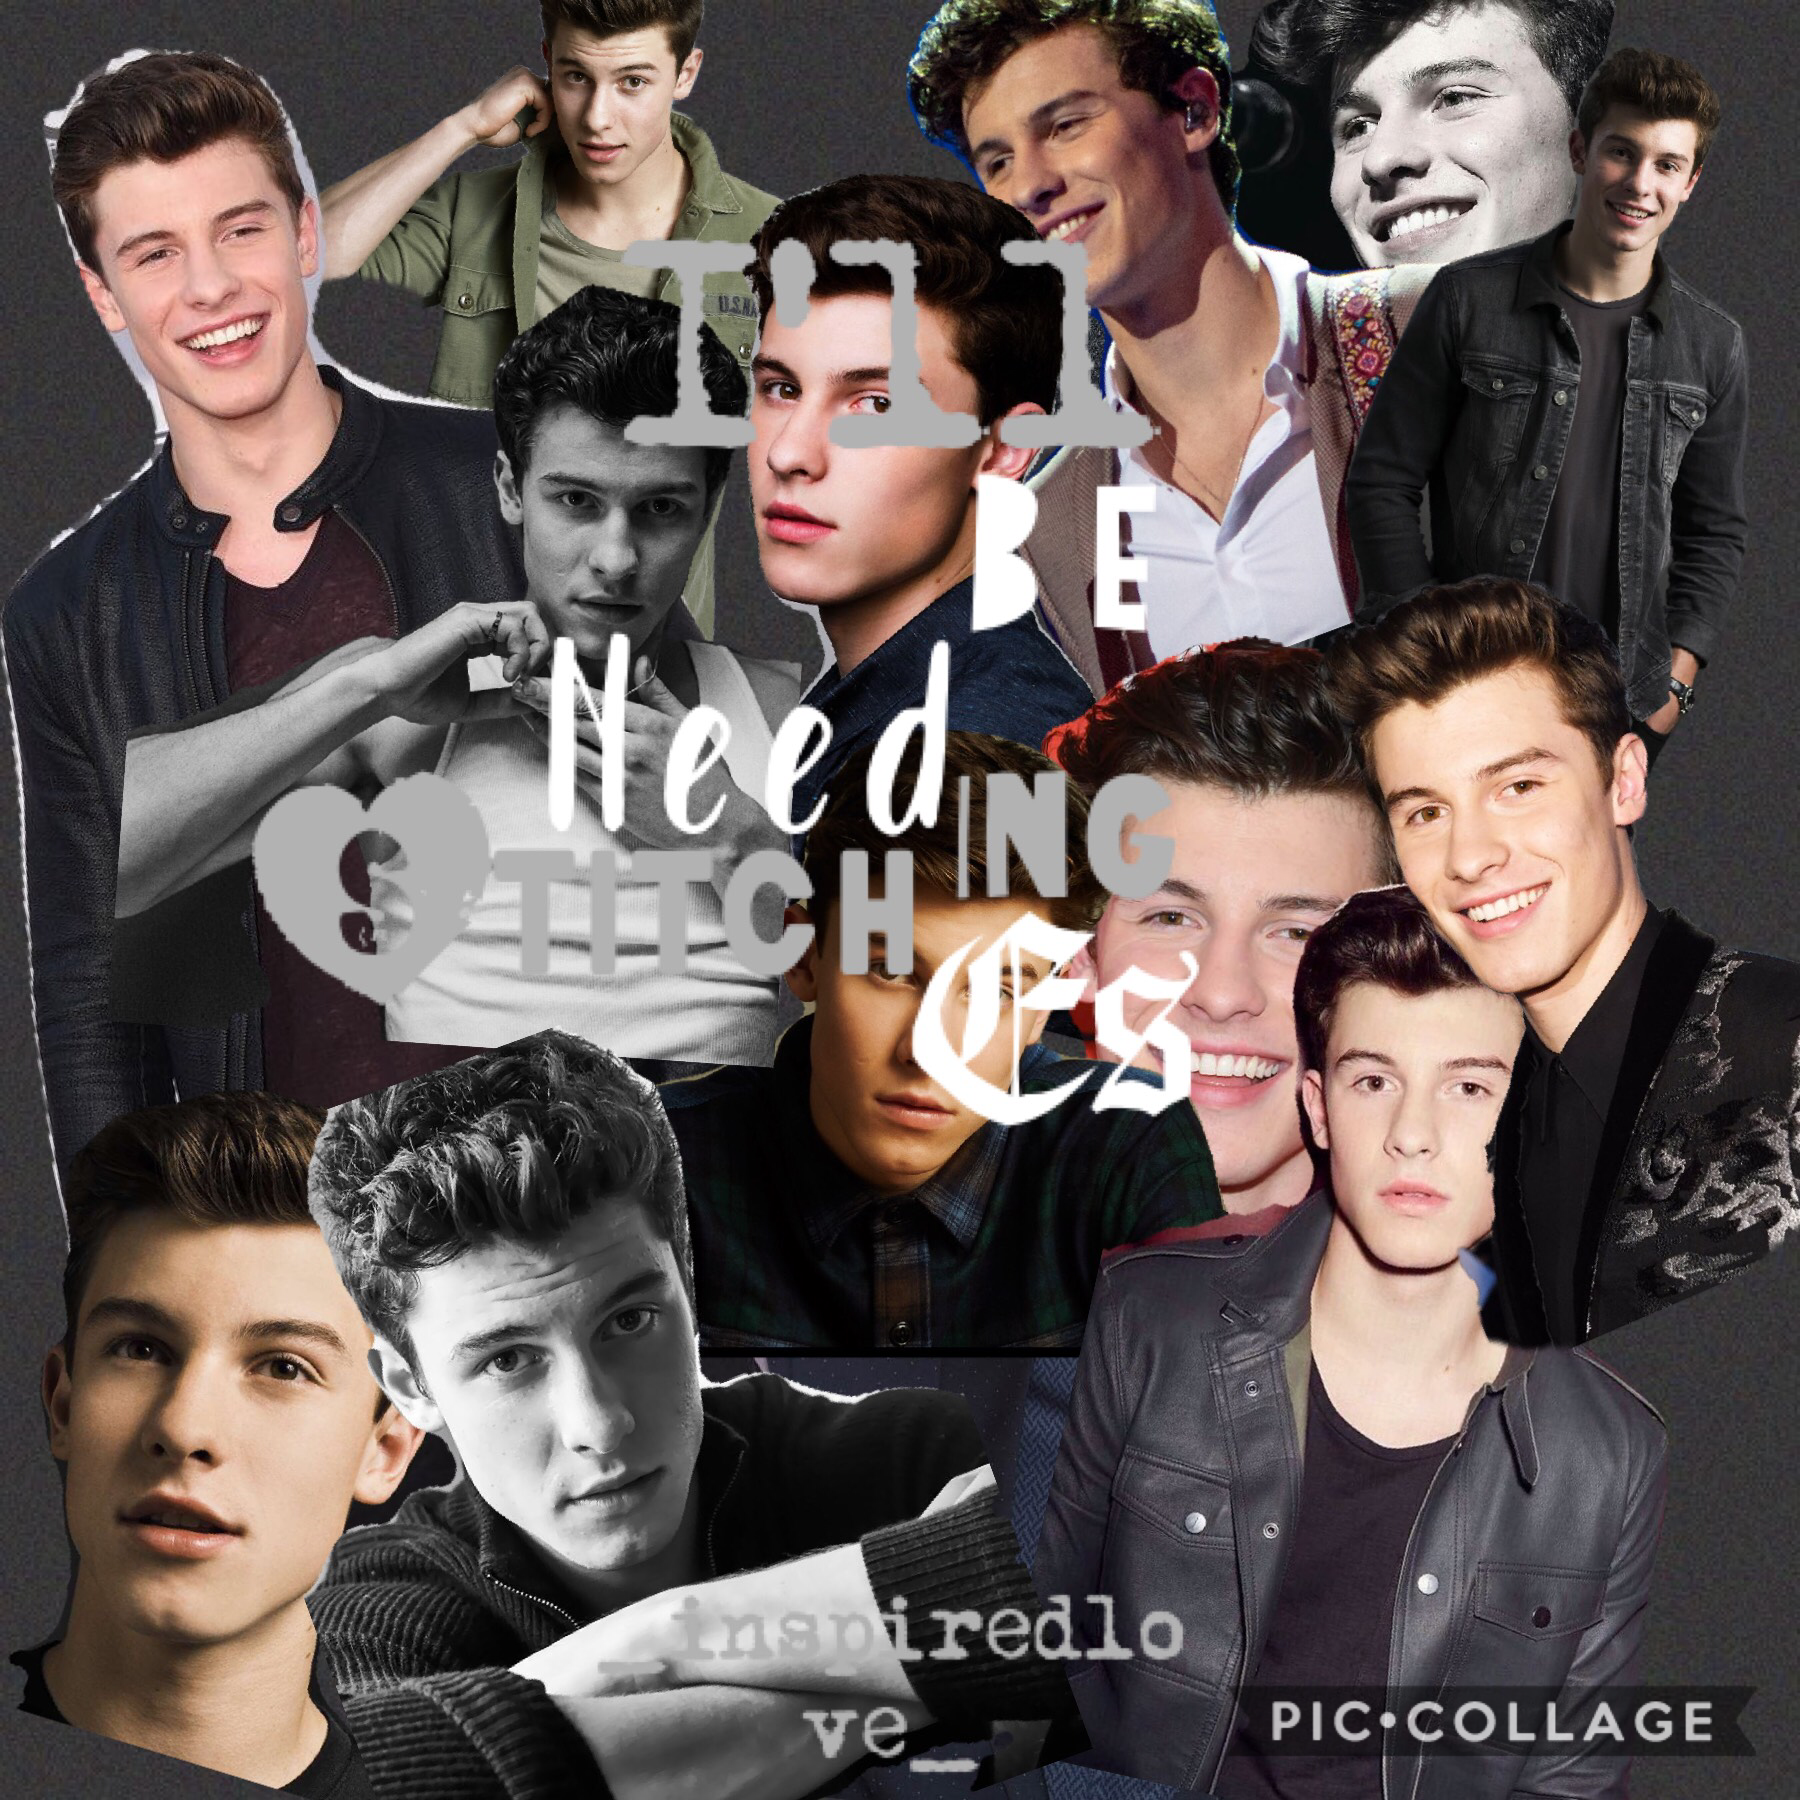 This is also very much trash but I made this for my friend who loves Shawn Mendes so...
Have a good day/night 💖